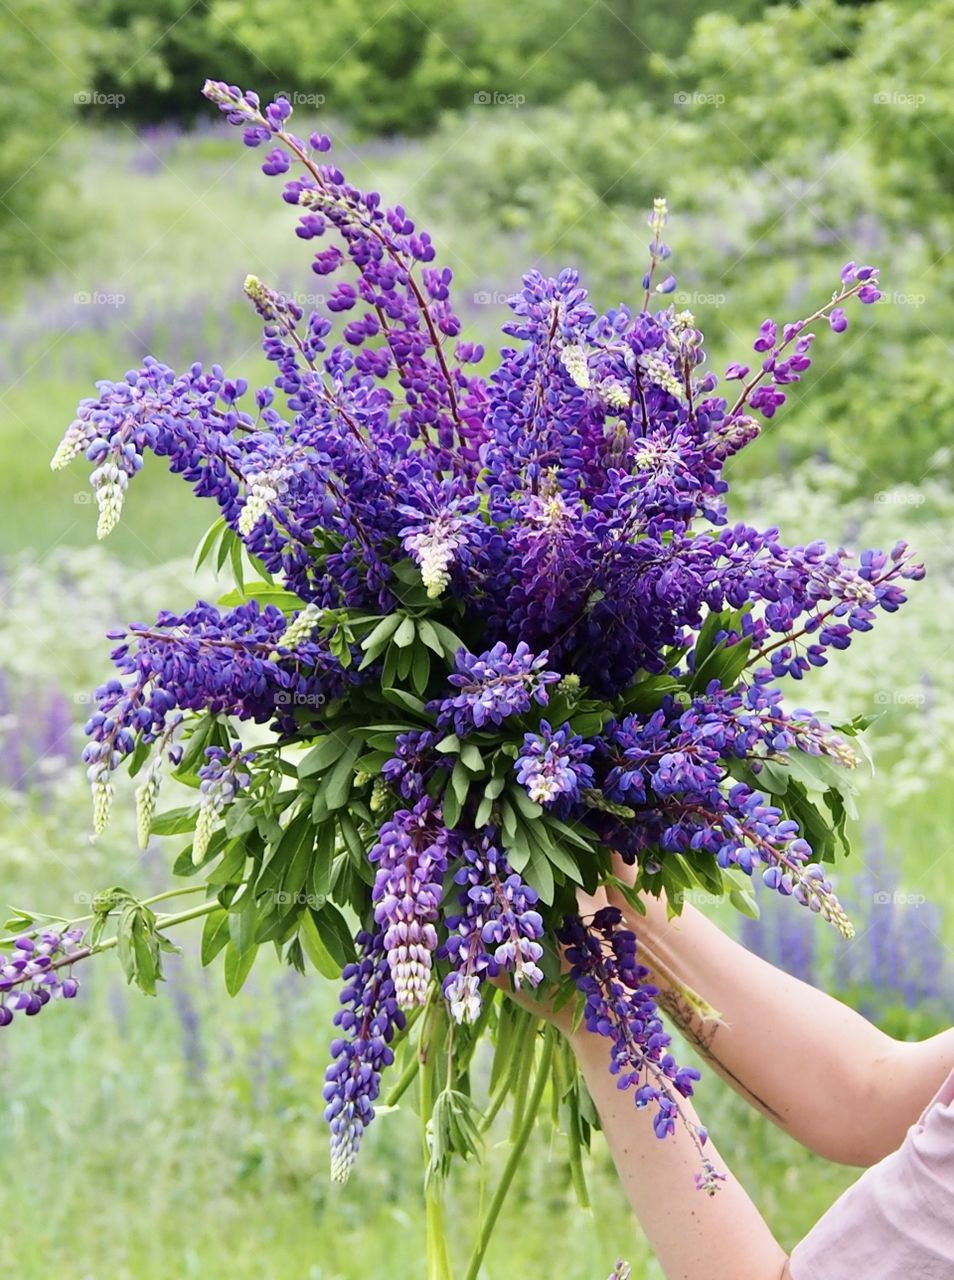 bouquet of lupines